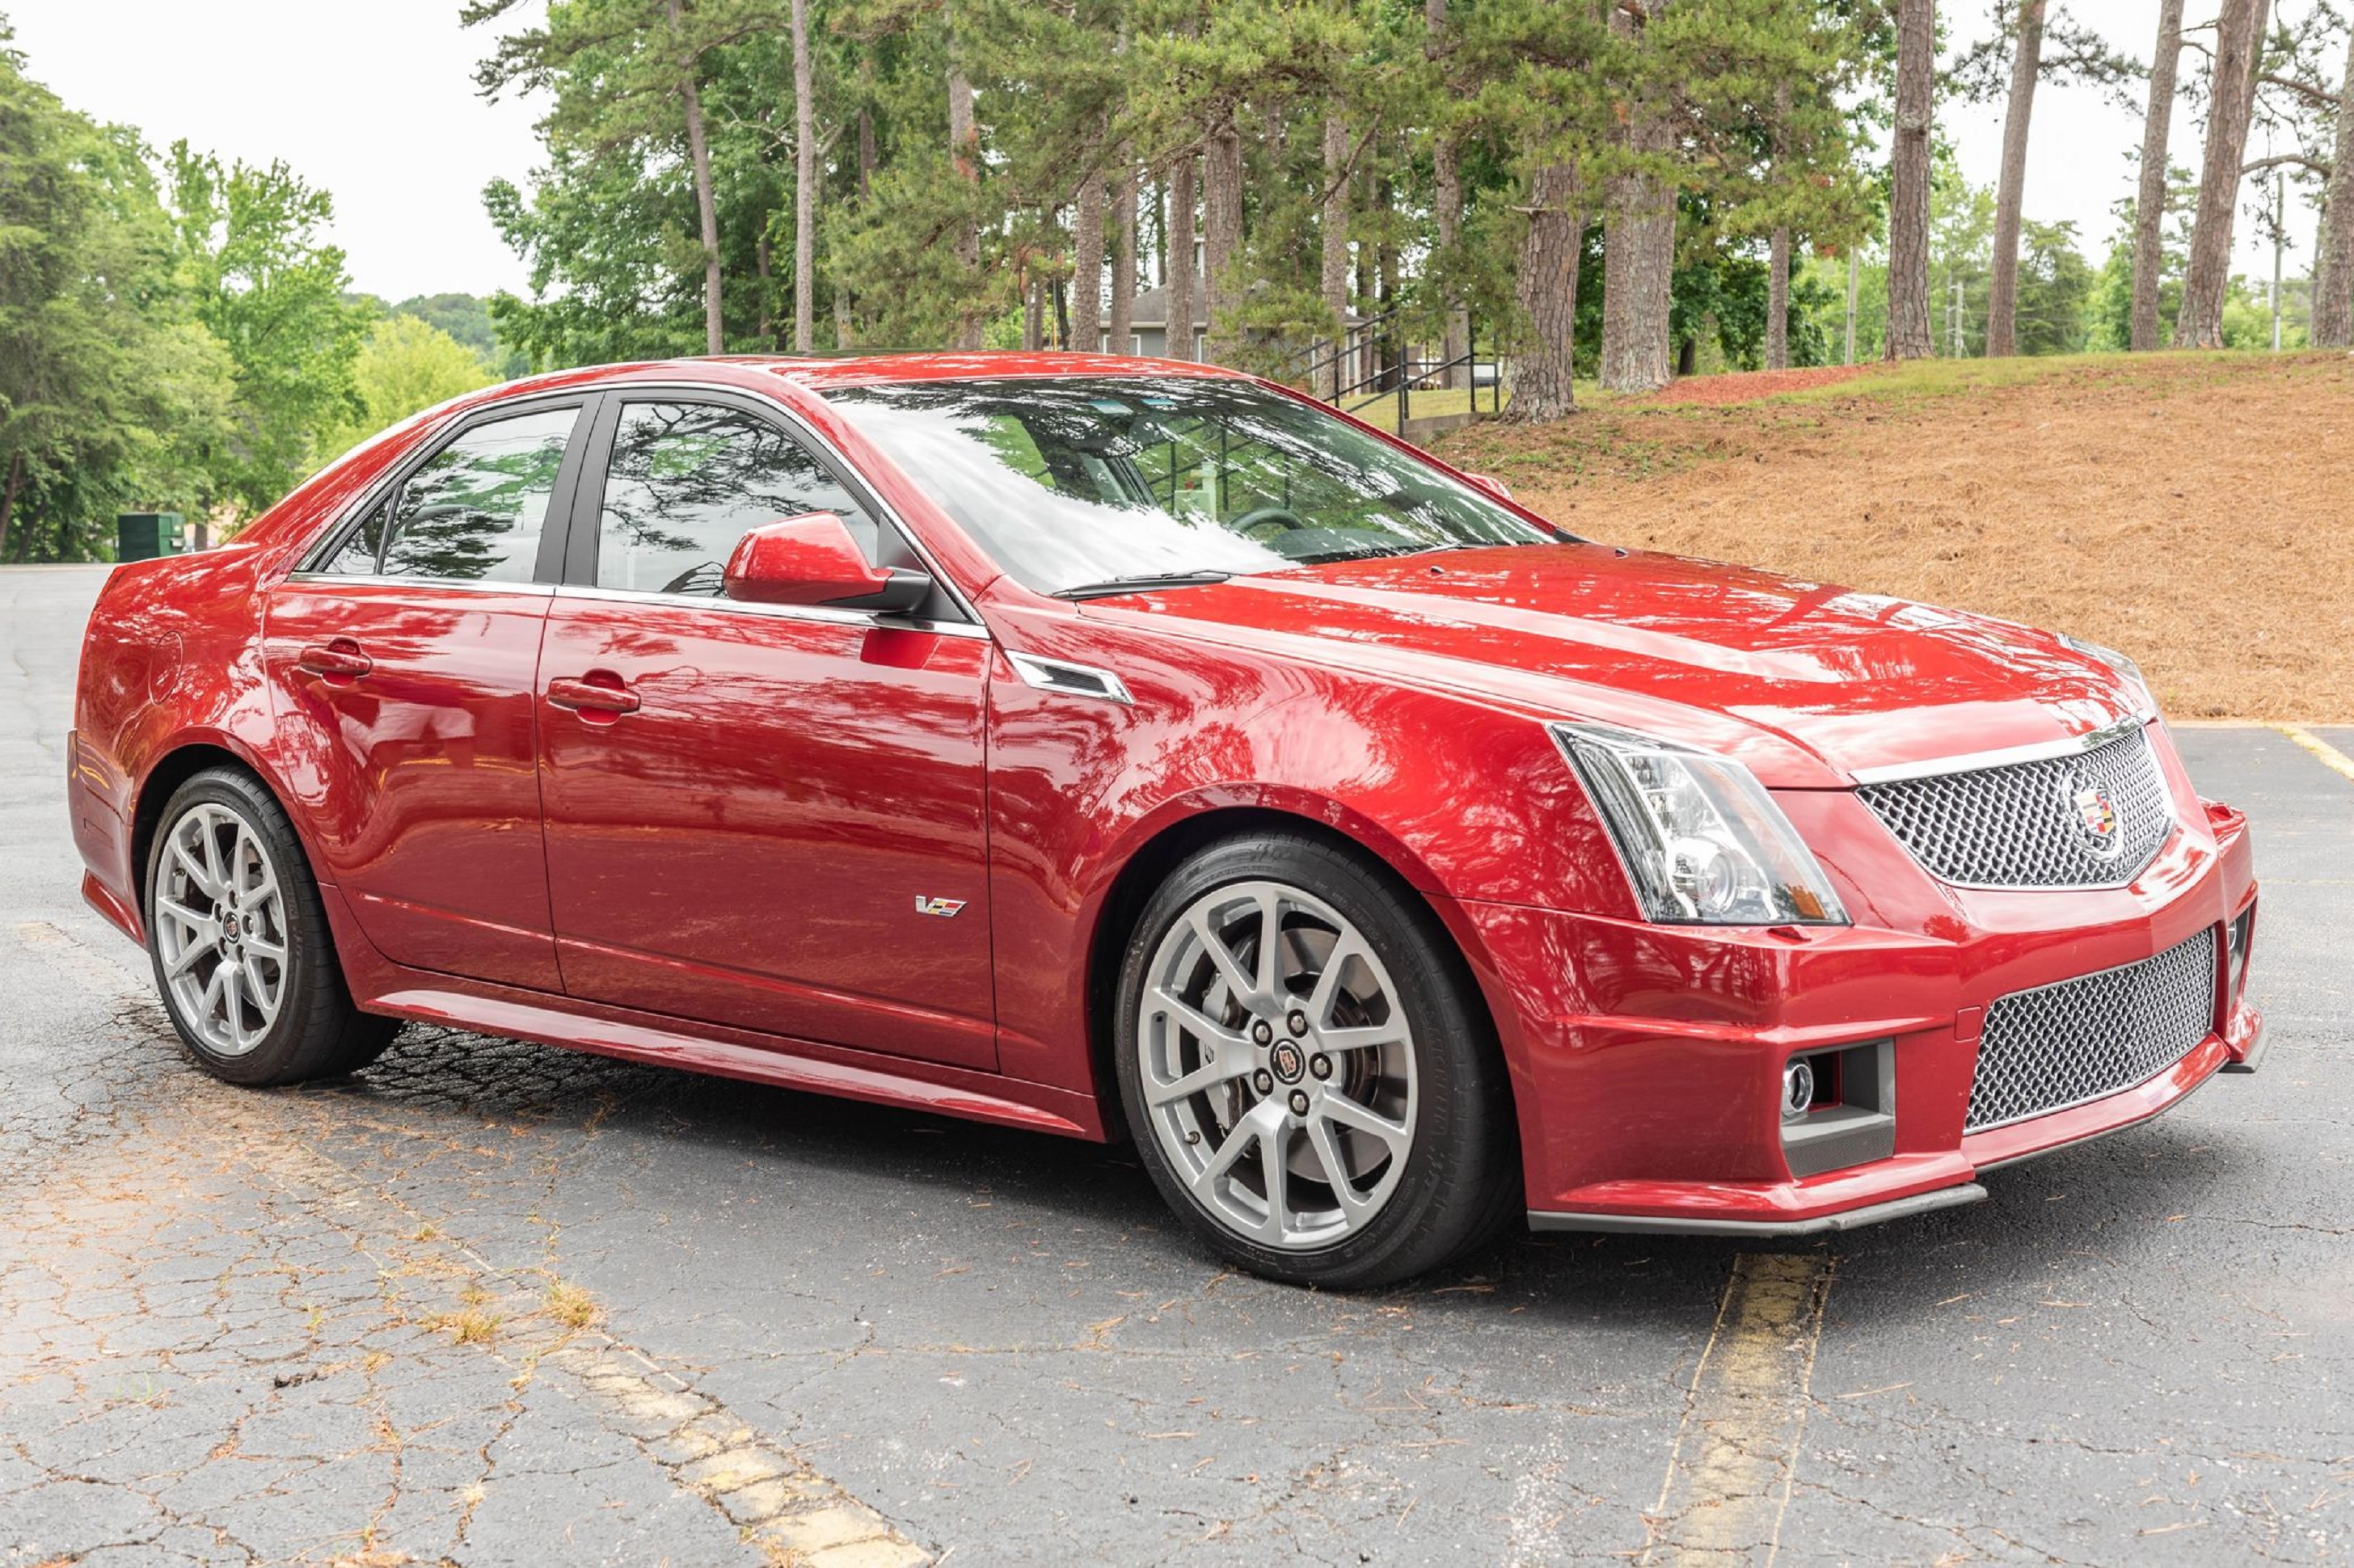 A red 2011 Cadillac CTS-V Sedan in a forest parking lot